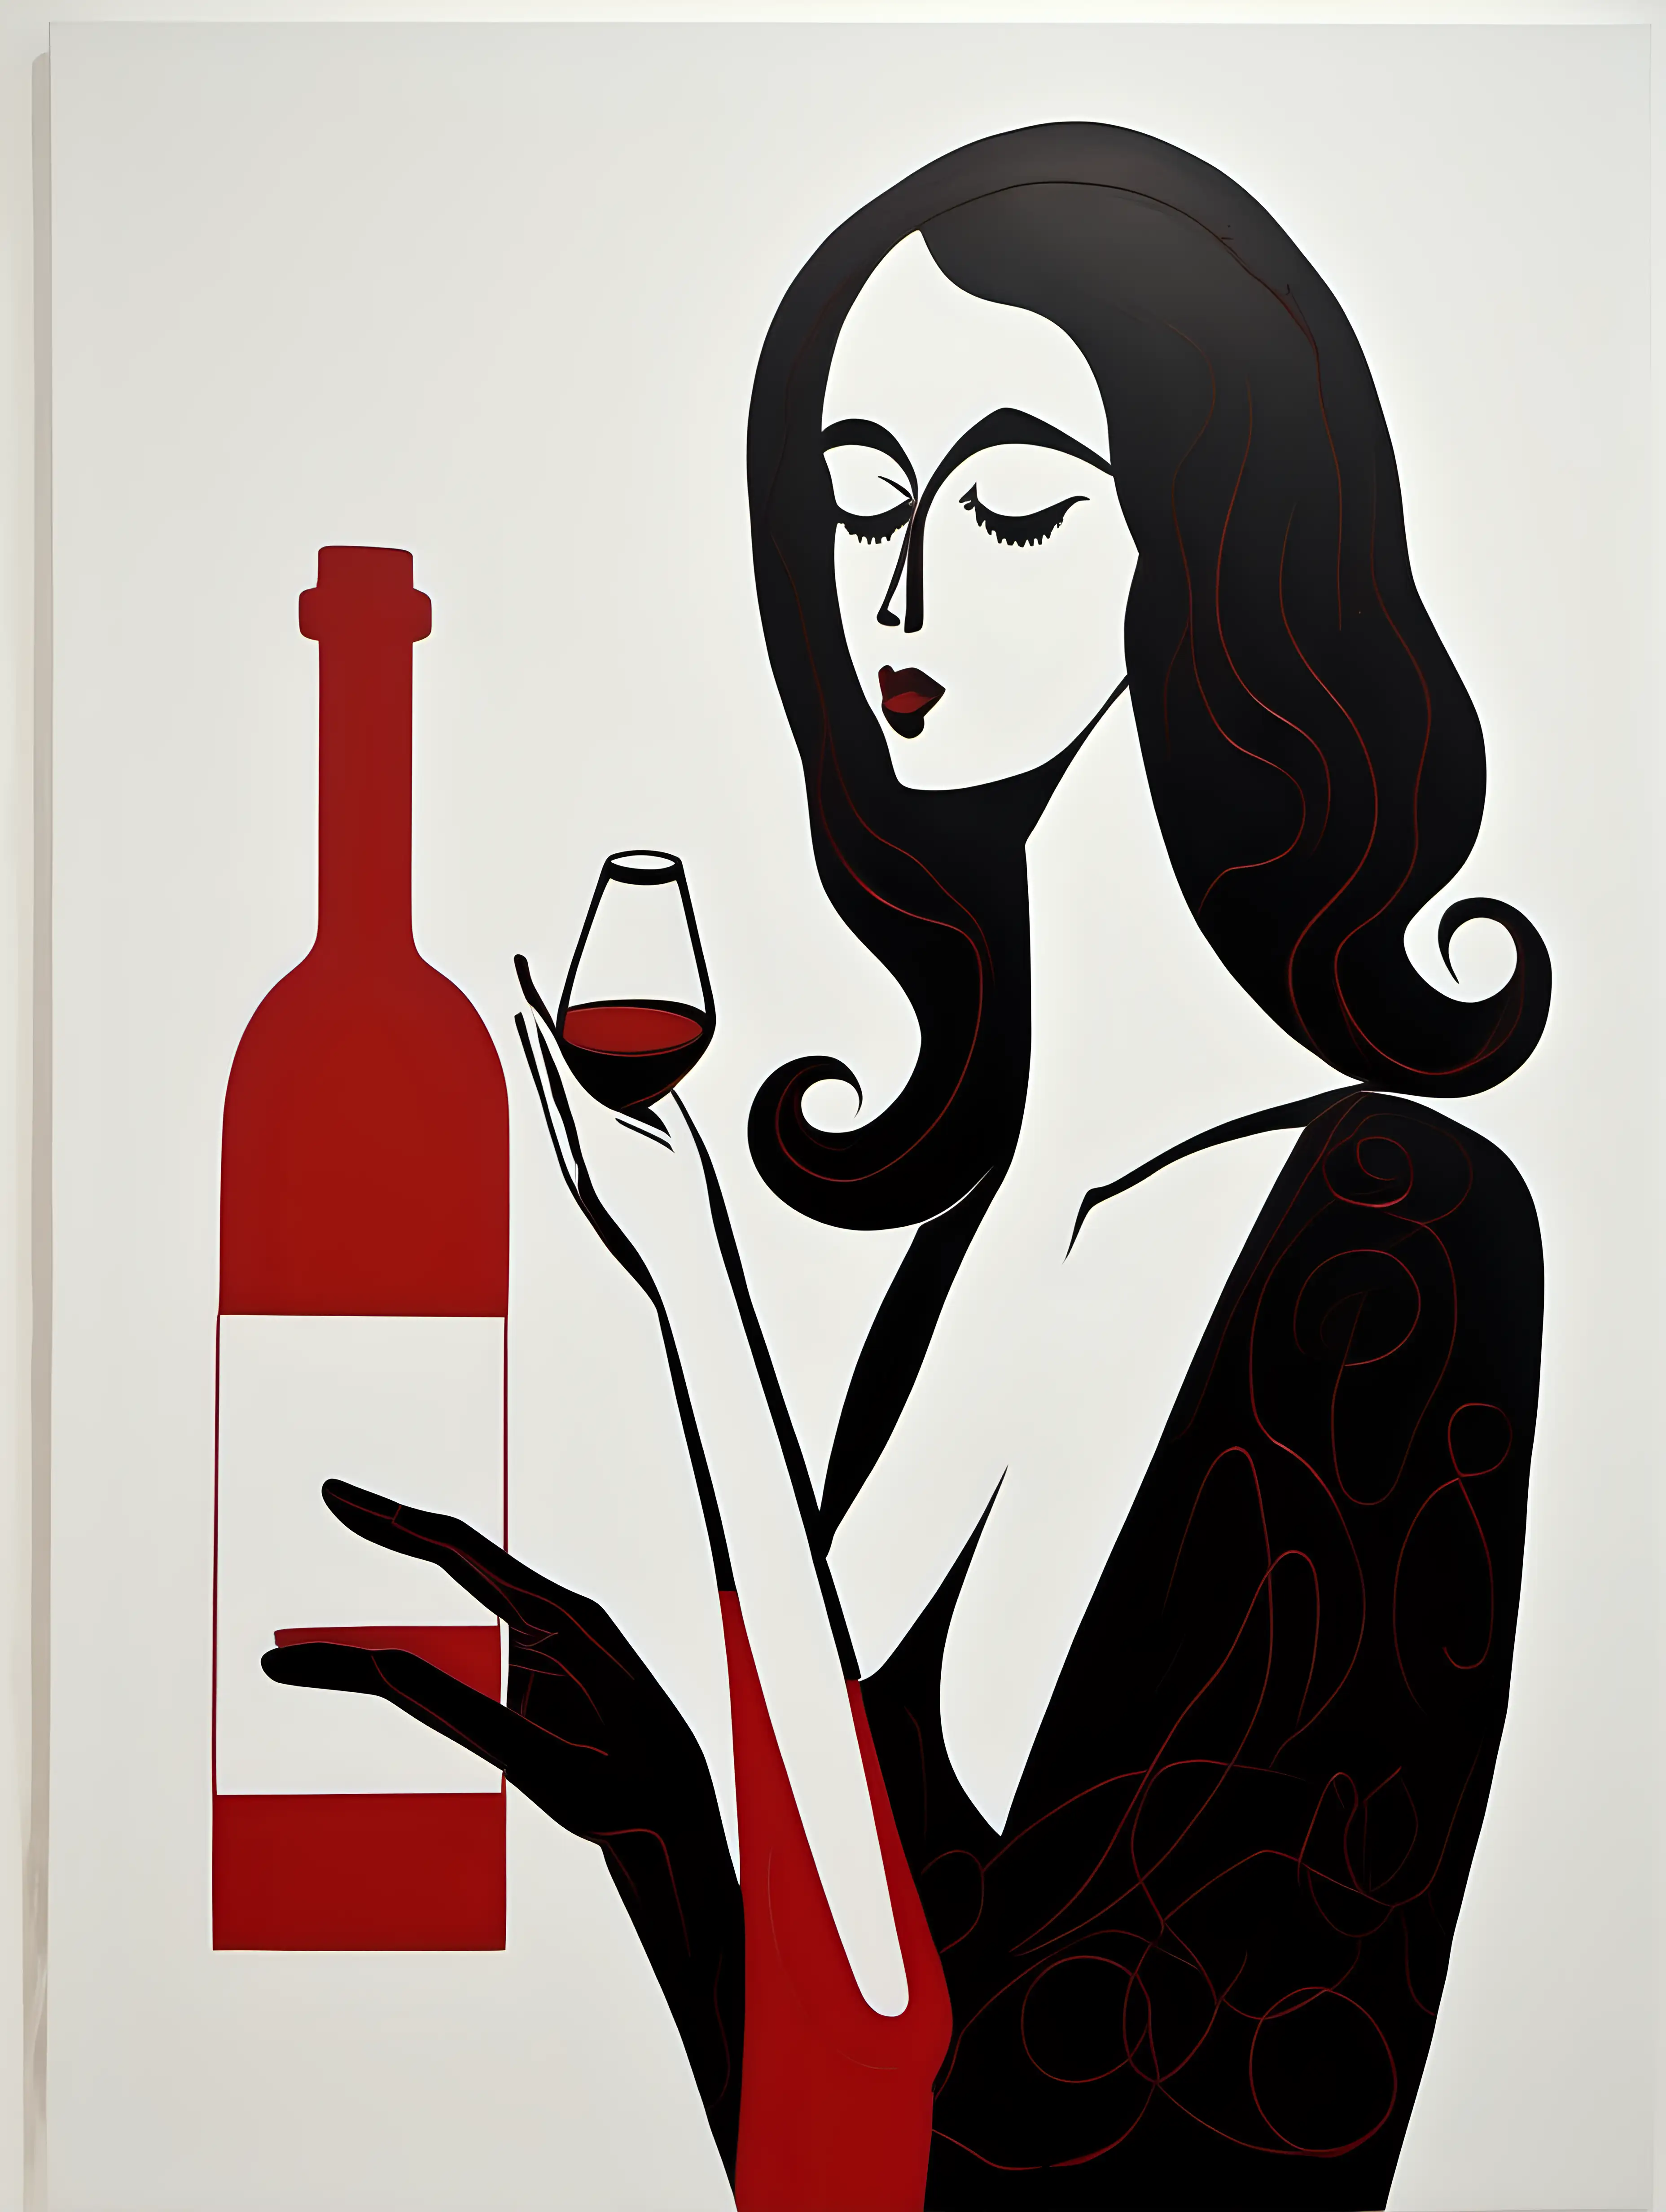 Modern art simple shapes, large stokes. A lady watching at a bottle of wine. Pay attention to arms and fingers. white background, red, black, and a scele of brown